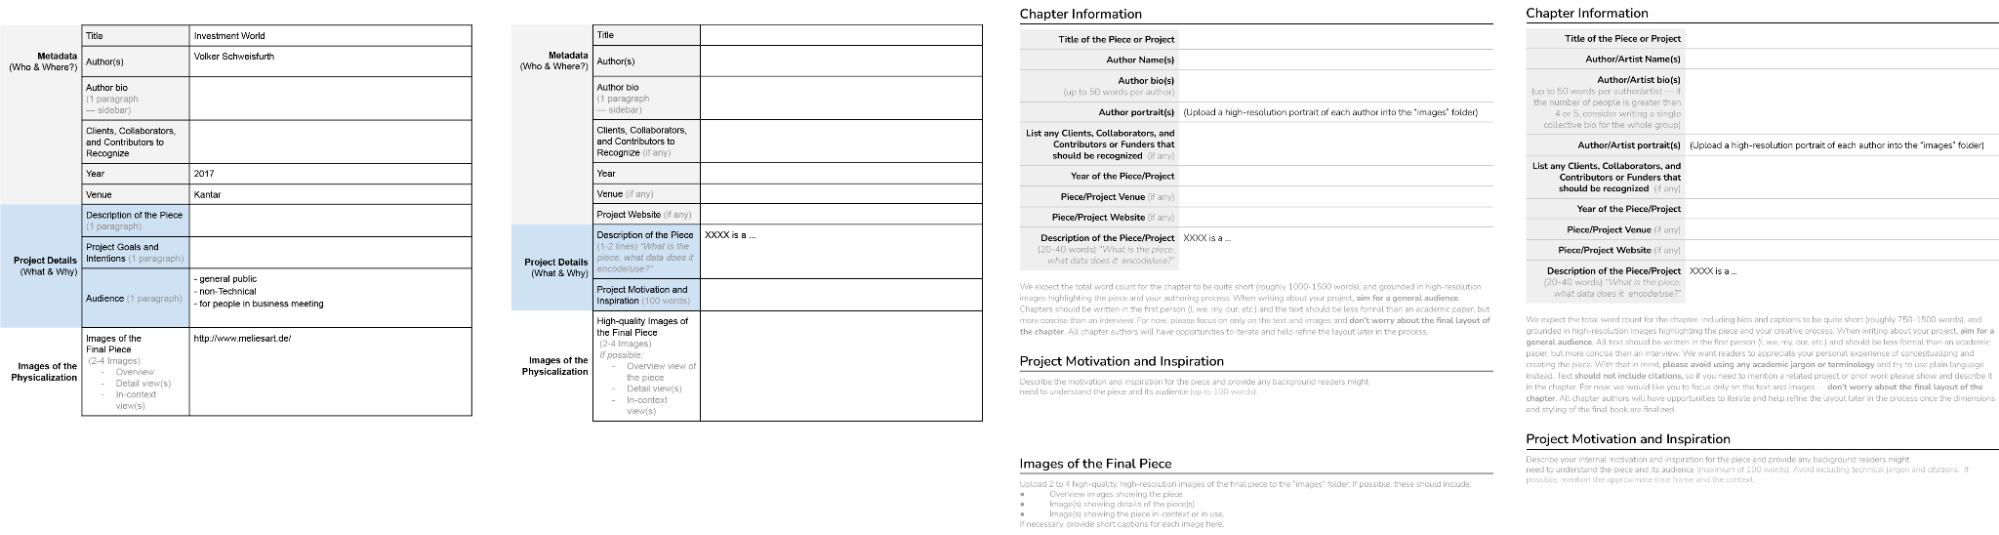 Four versions of the first page of the template, showing prompts for sections and elements such as Title or Description of the Piece.